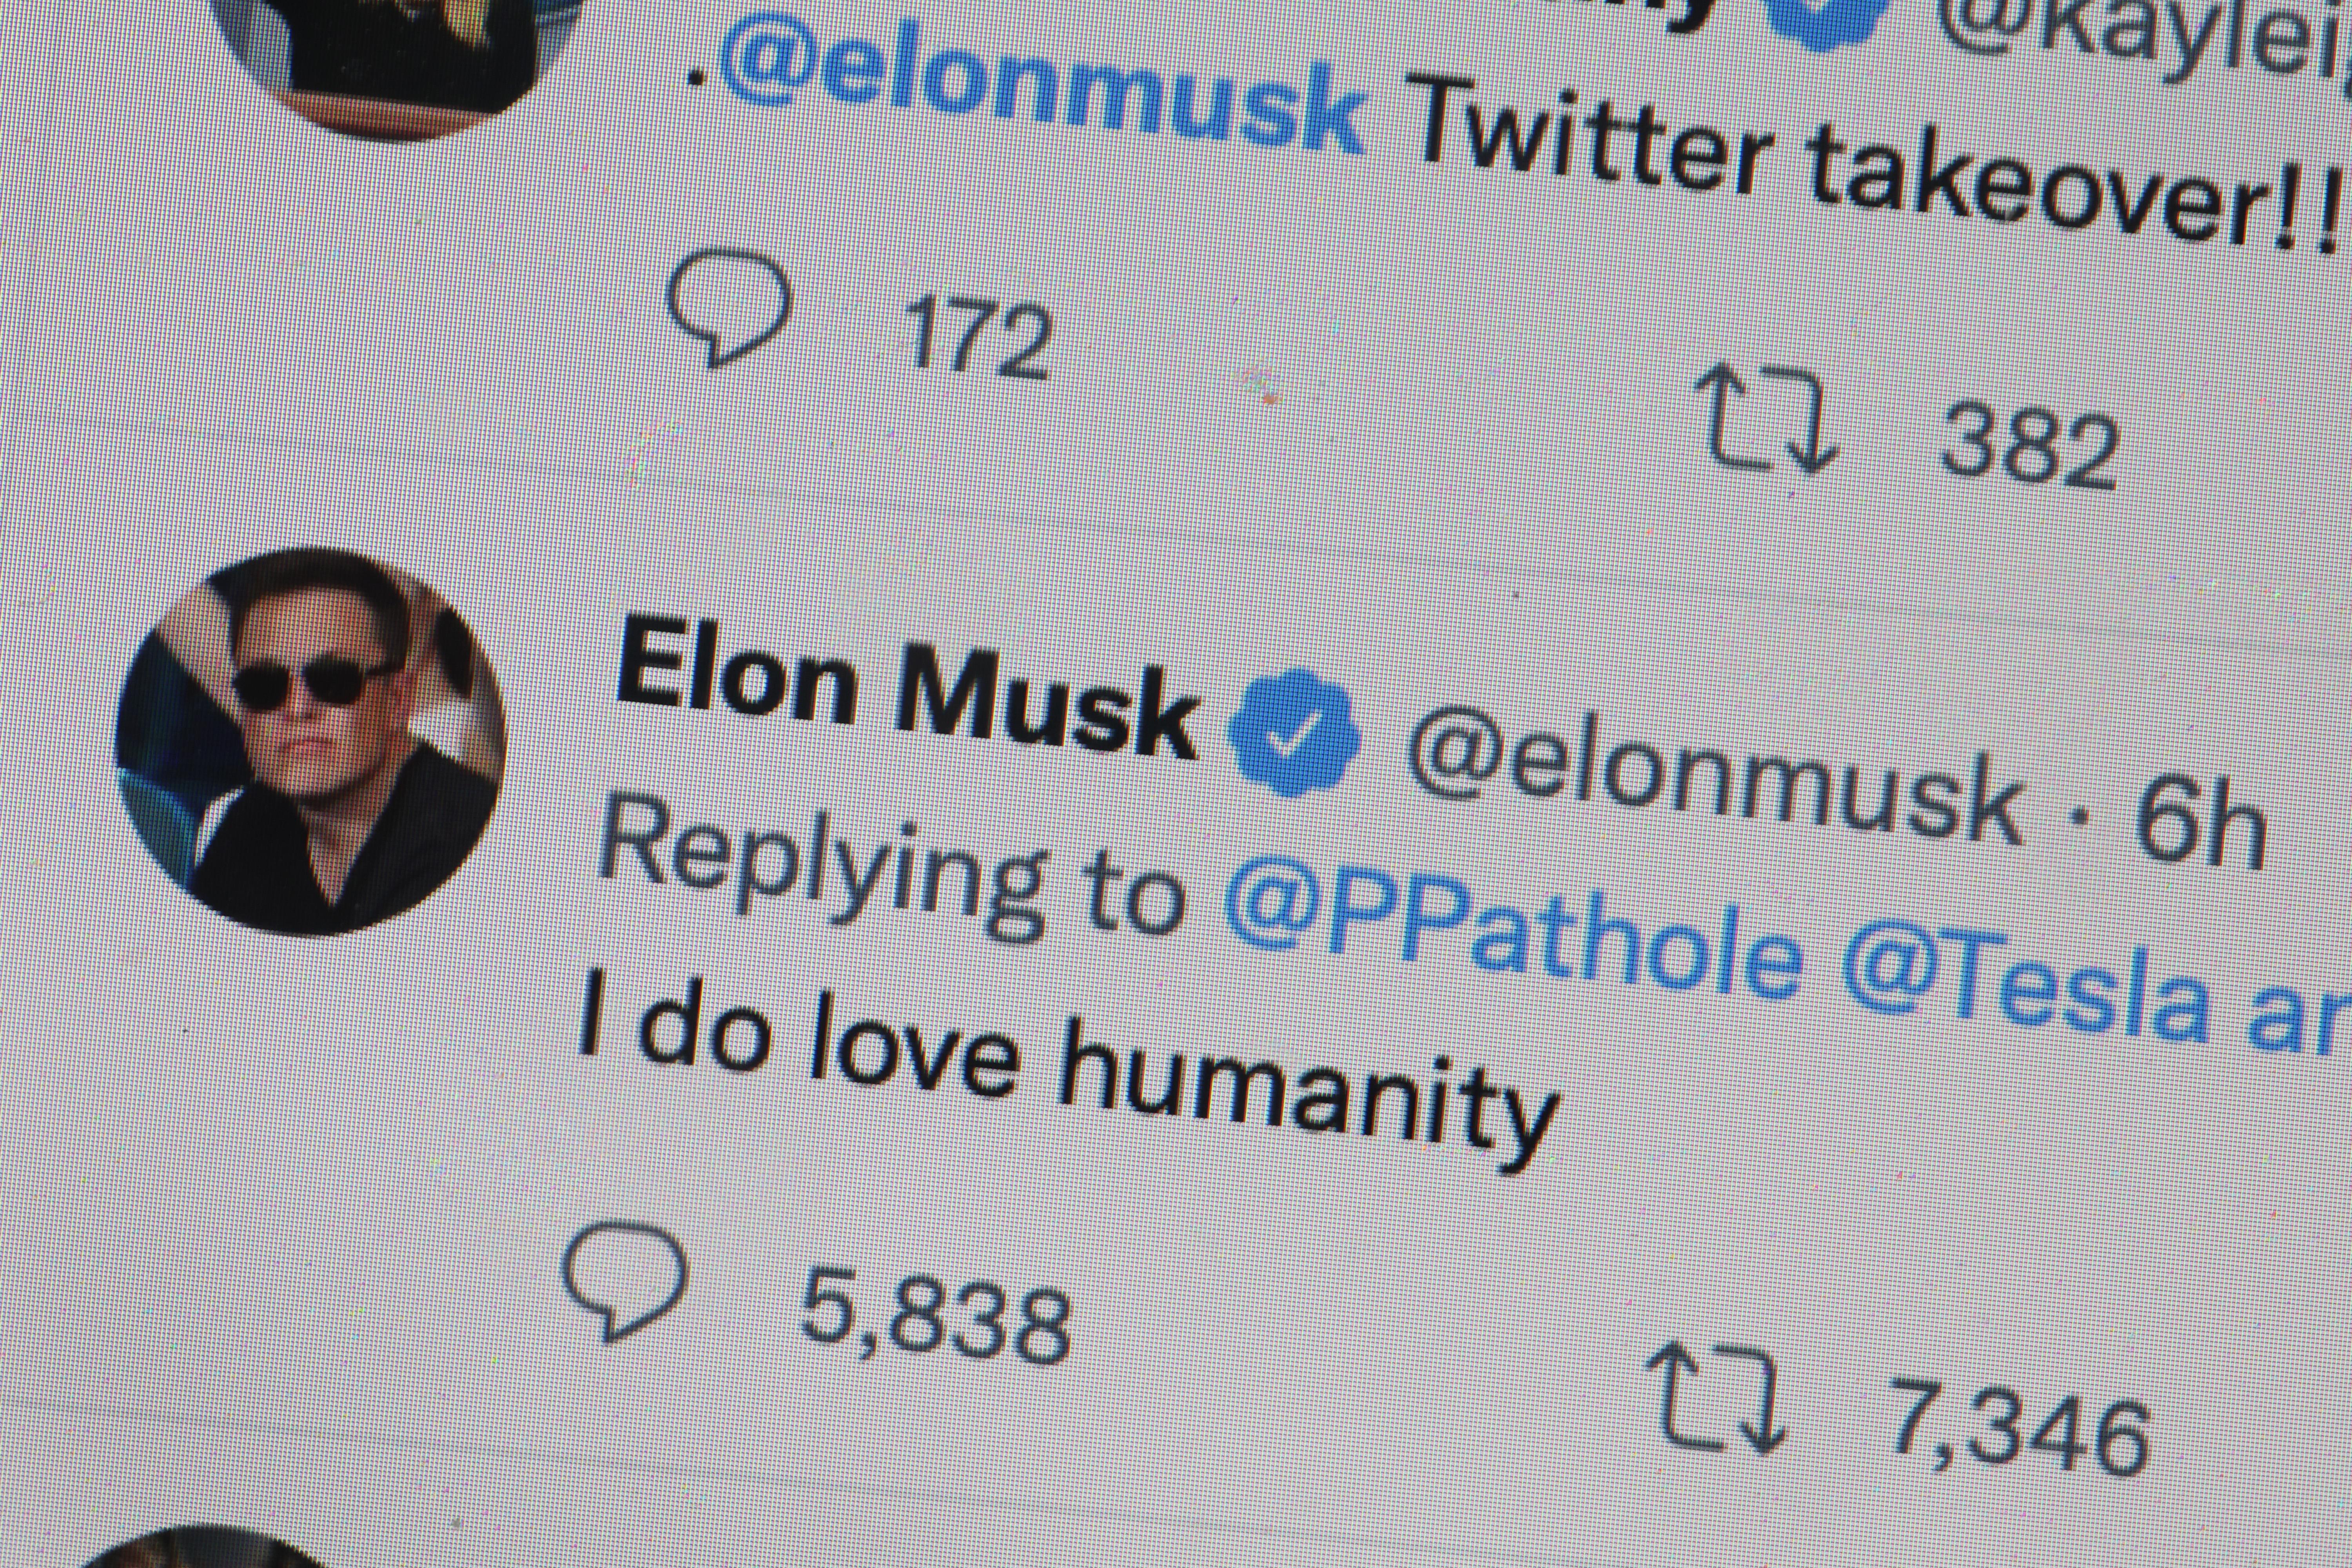 Calm down about Elon Musk and Twitter.